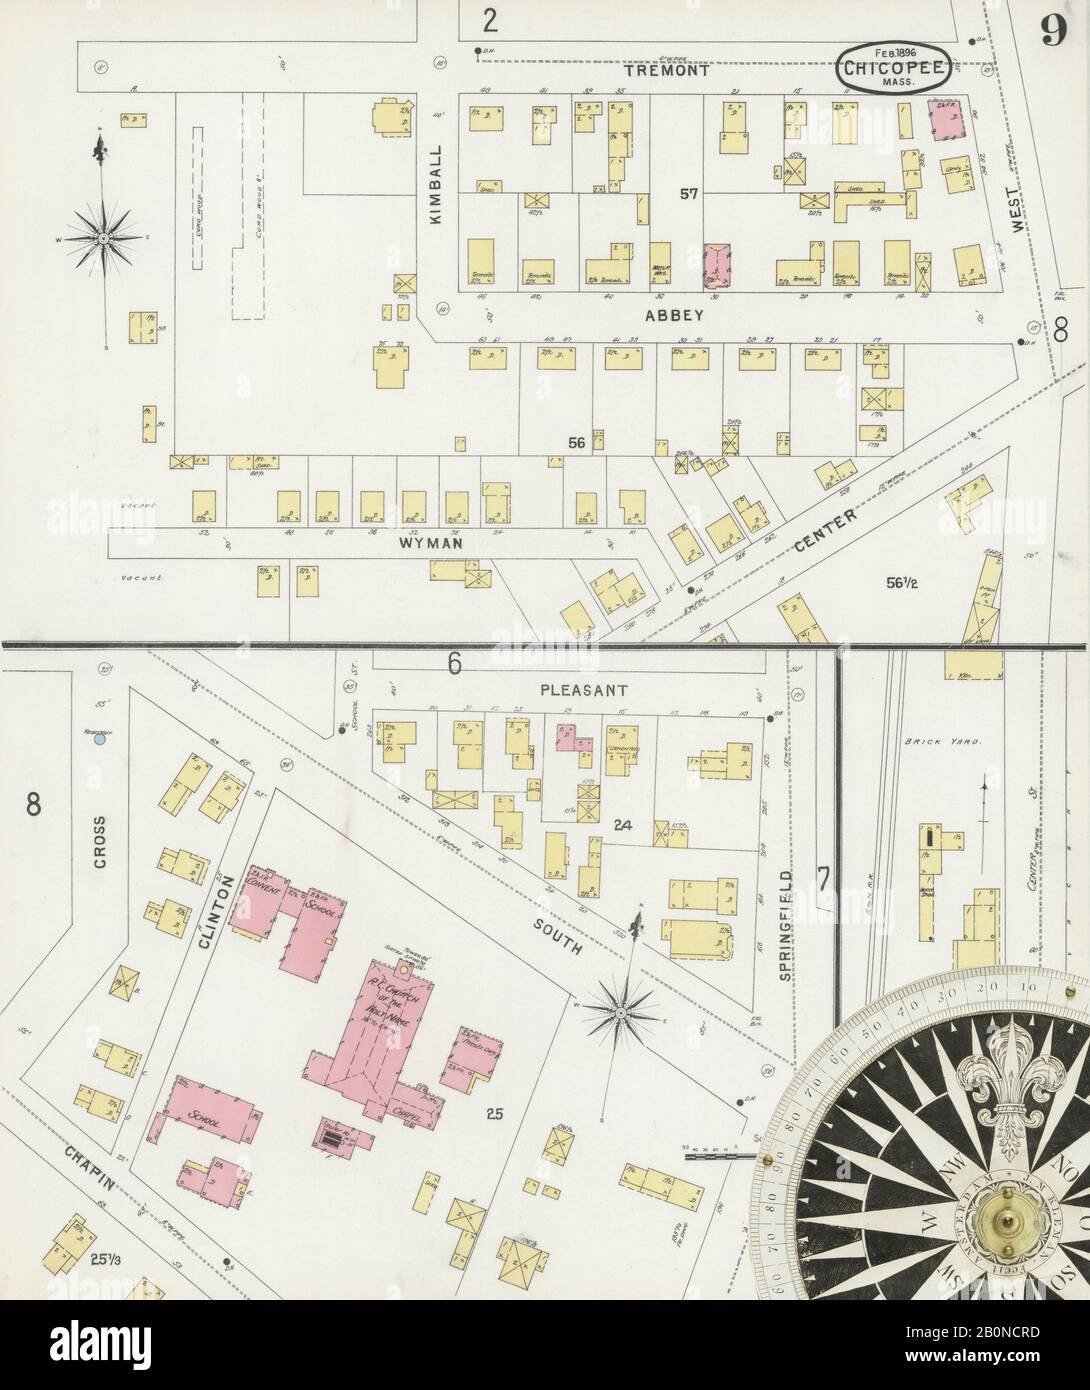 Image 9 of Sanborn Fire Insurance Map from Chicopee, Hampden County, Massachusetts. Feb 1896. 16 Sheet(s). Includes Chicopee Falls, America, street map with a Nineteenth Century compass Stock Photo